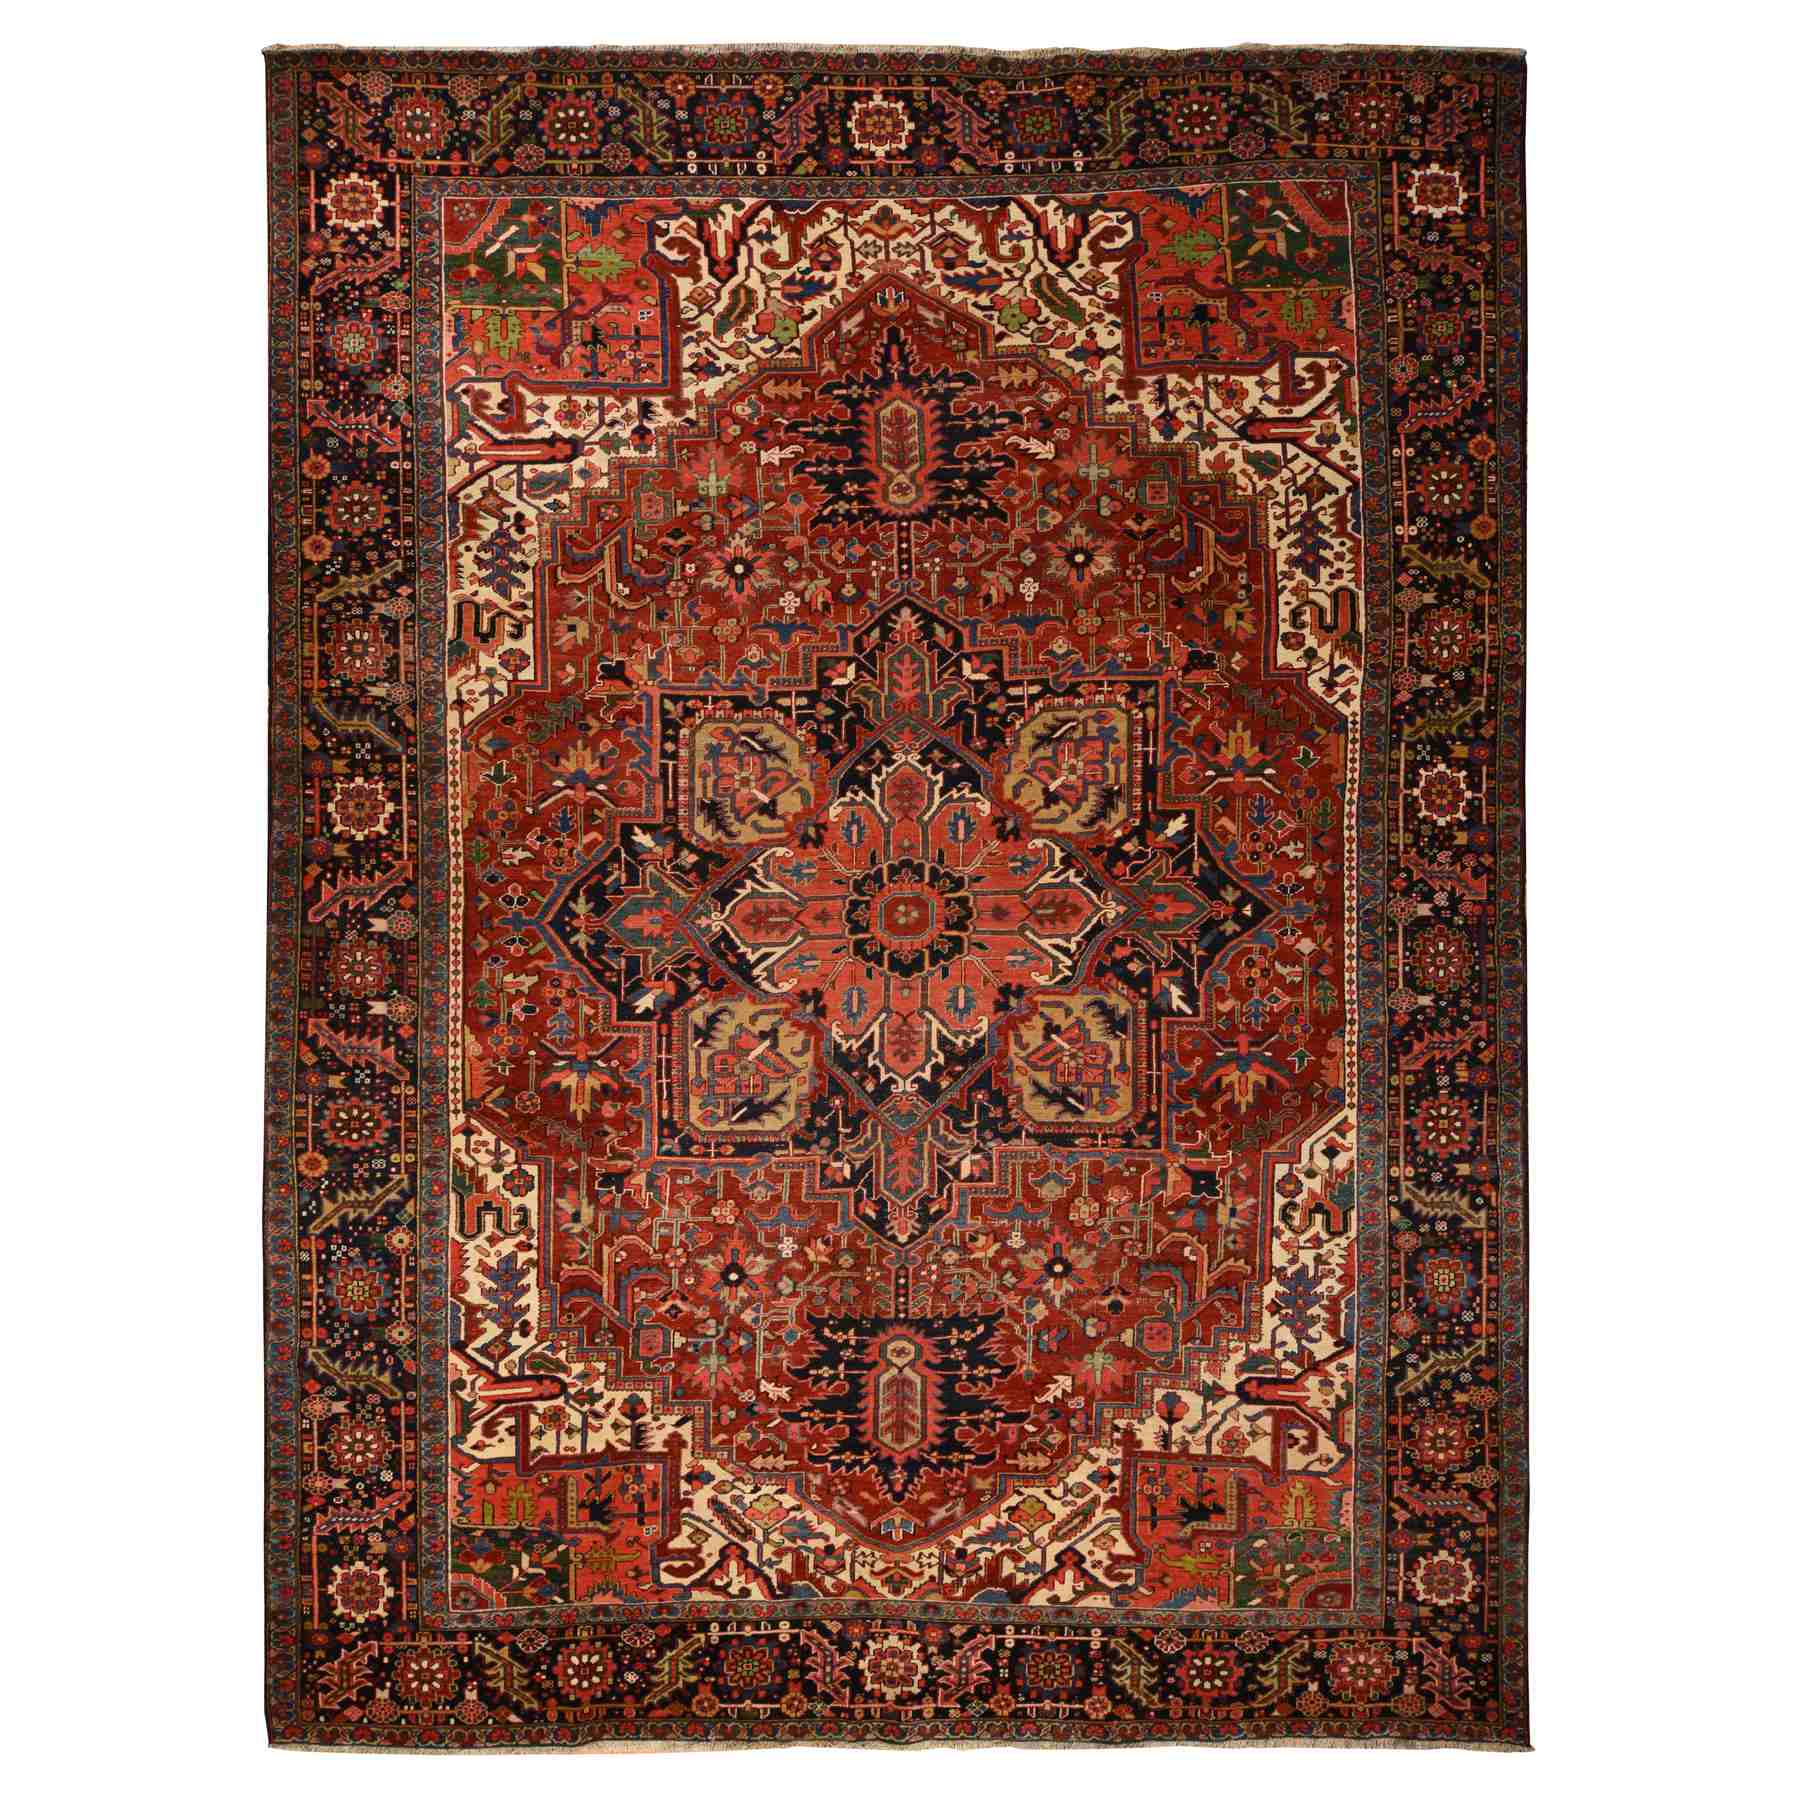 Antique-Hand-Knotted-Rug-391130